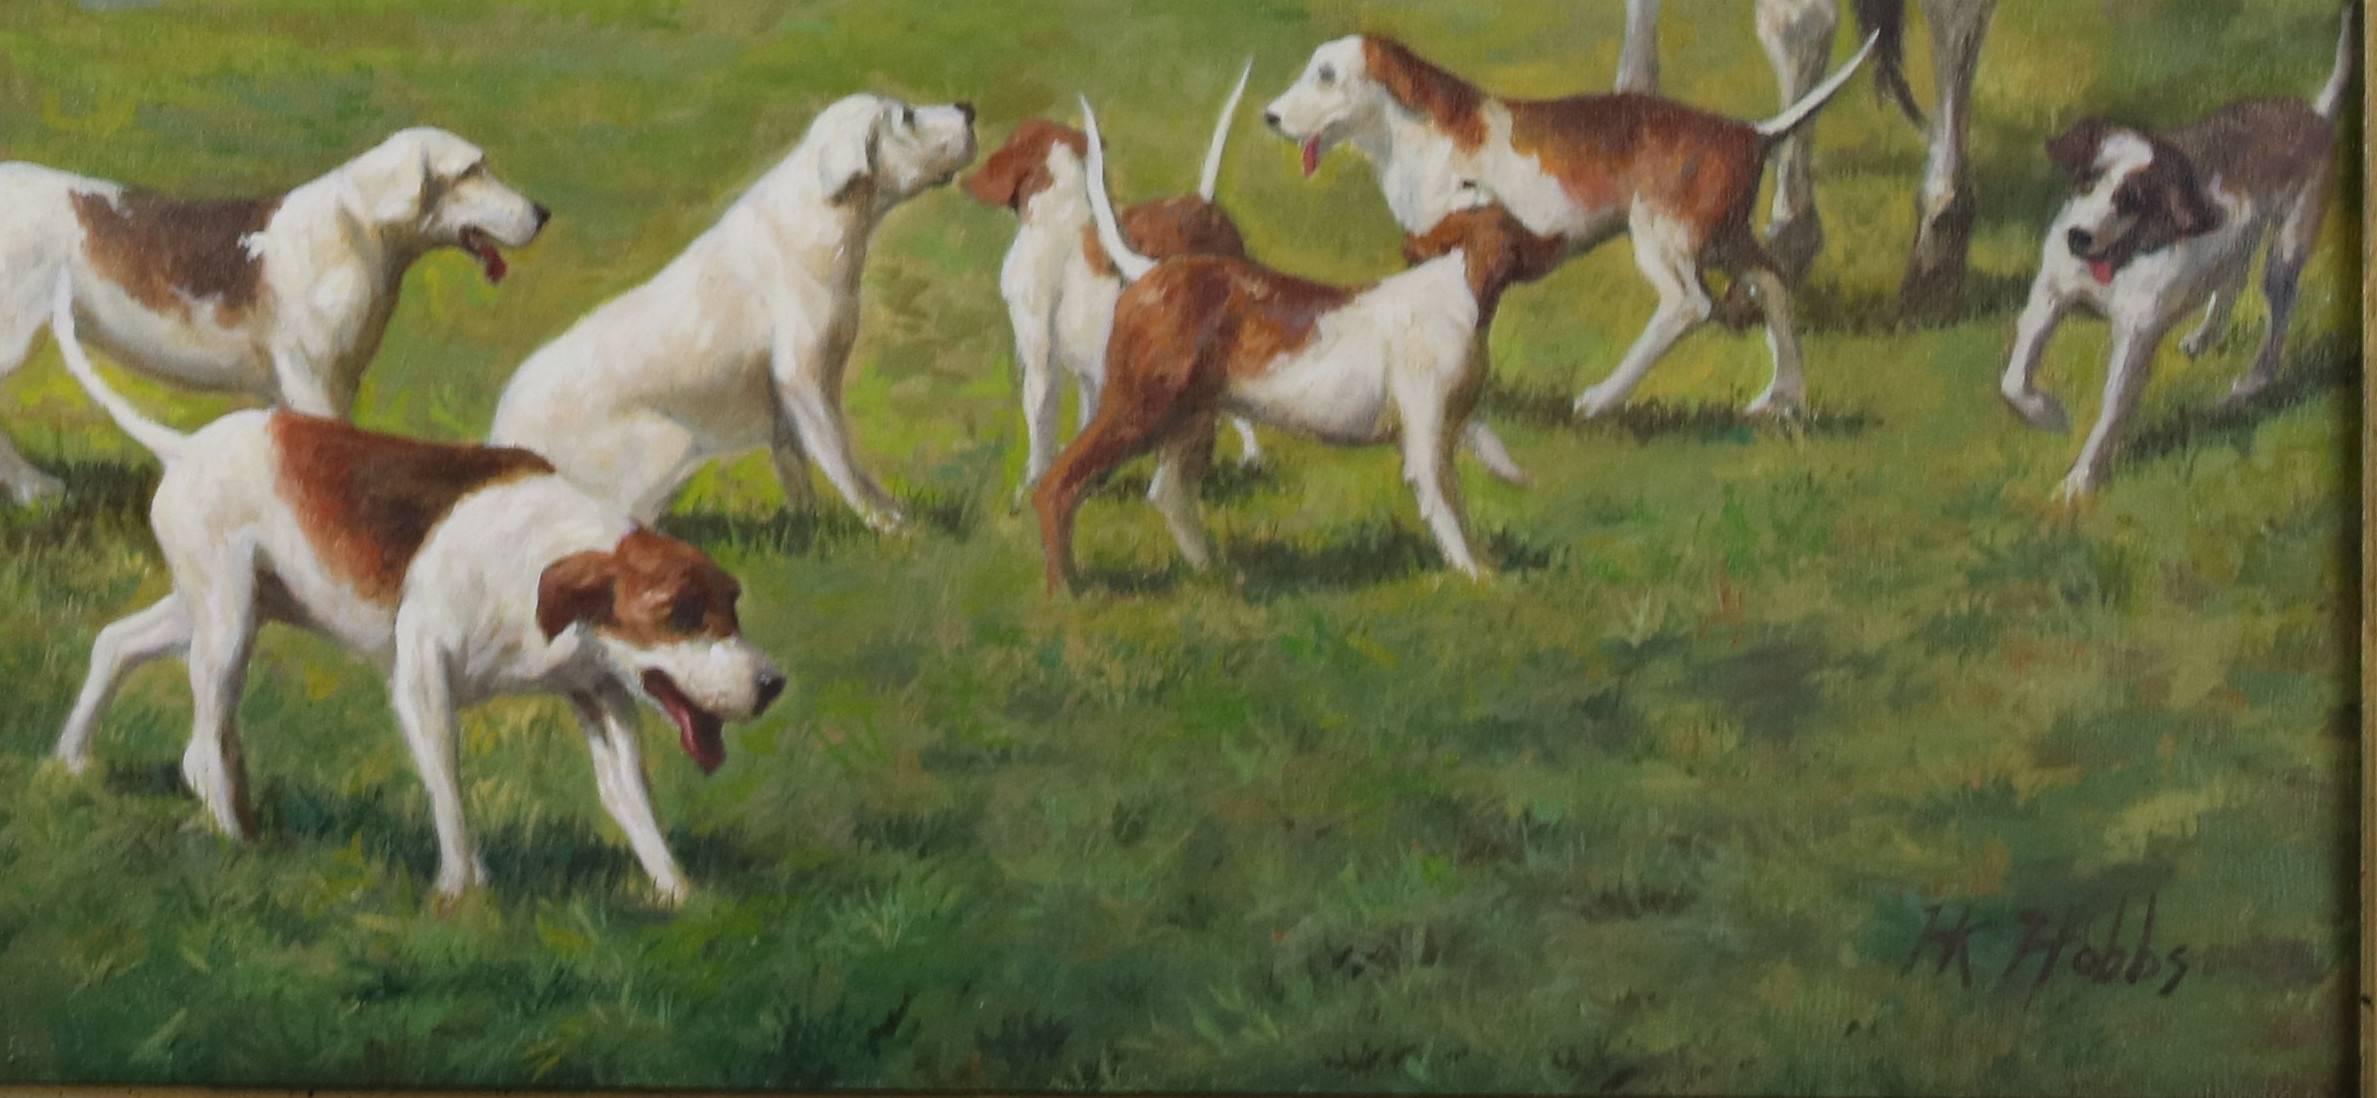 A Classic well executed oil painting of the fox hunt in the lush English countryside in the manner of the fine hunt sporting painters- Thoroughbred horses with beautiful frisky hounds, followed by four proper English gentlemen or woman riders- by HK